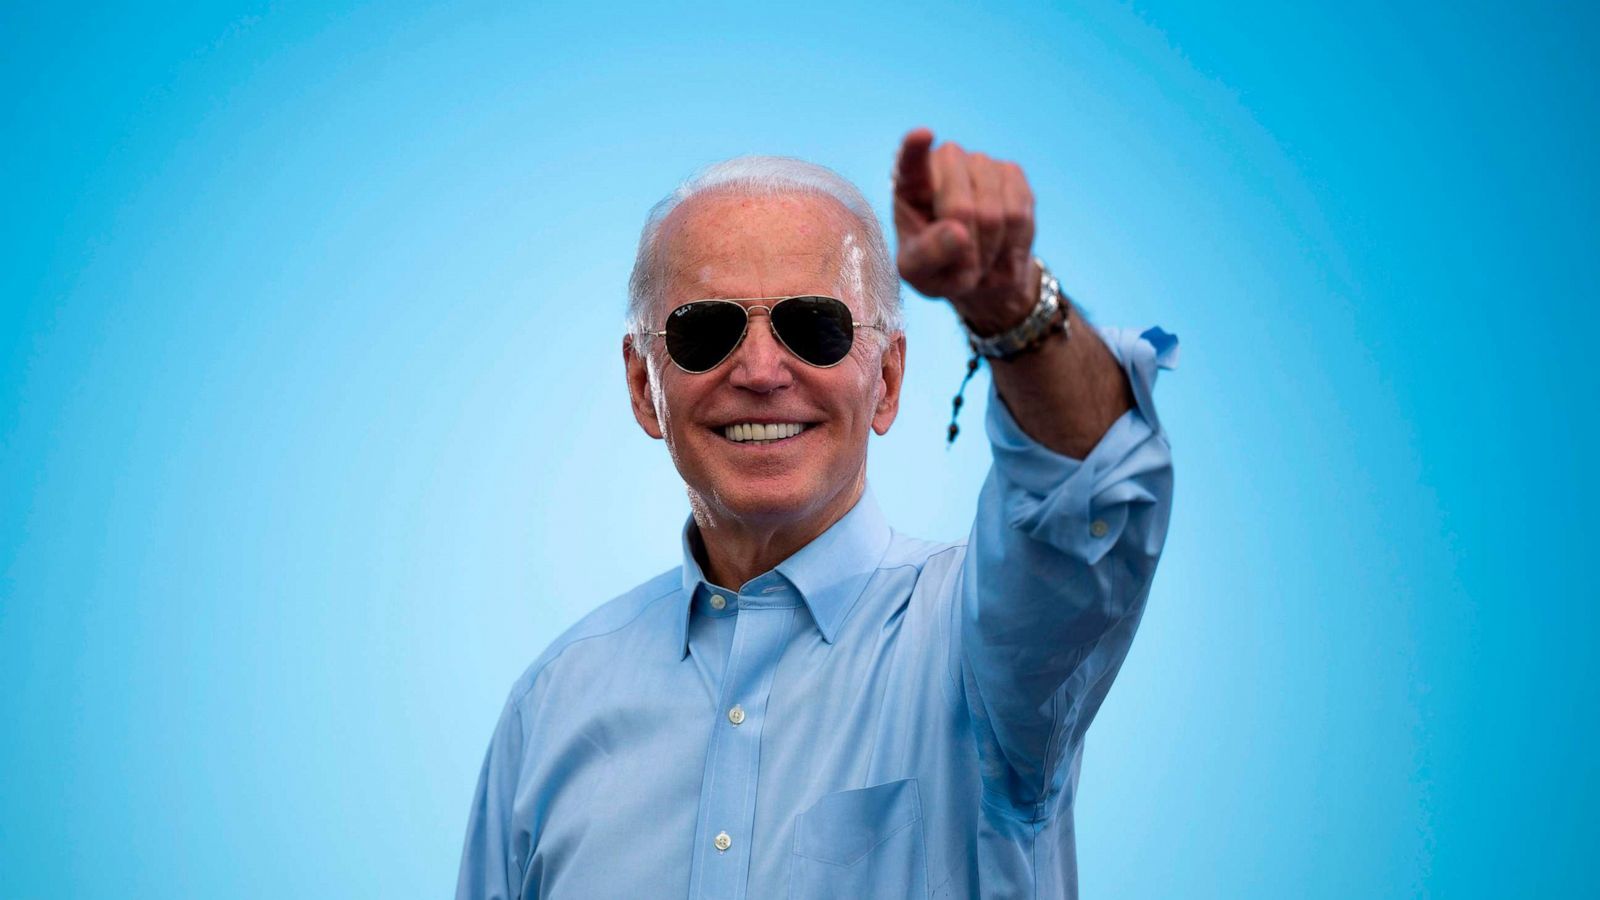 Joe Biden defeats Donald Trump for president in bitter and historic election